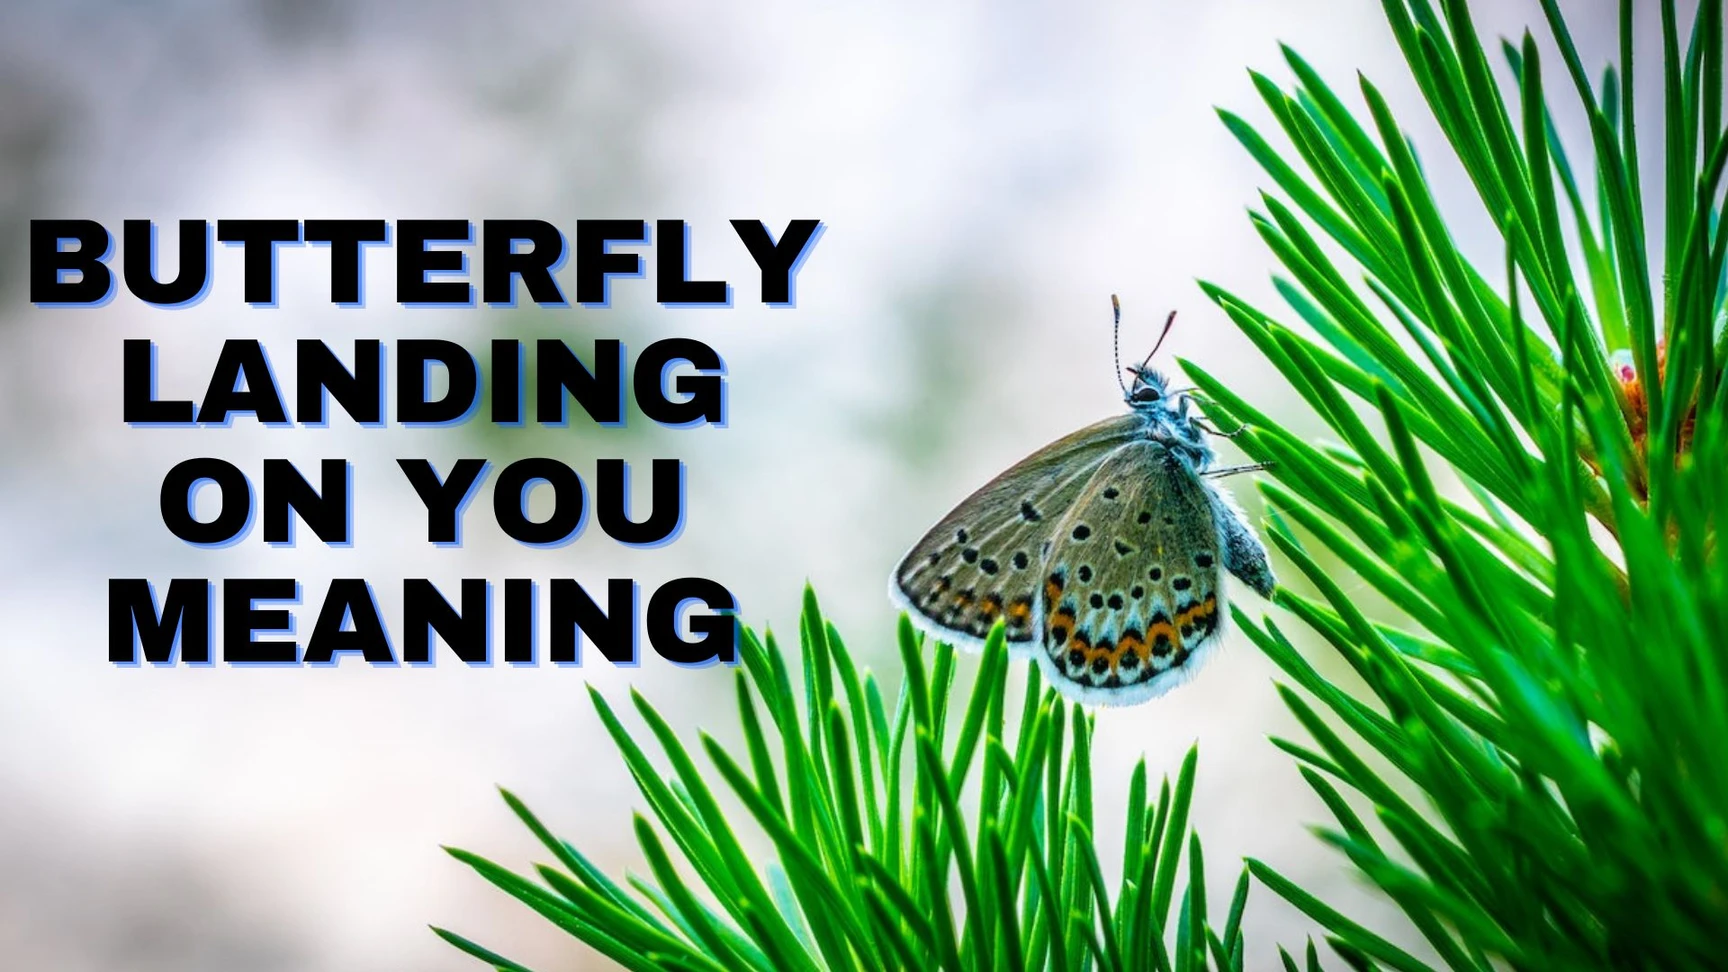 What Are The Spiritual Meanings Of A Butterfly Landing On You?